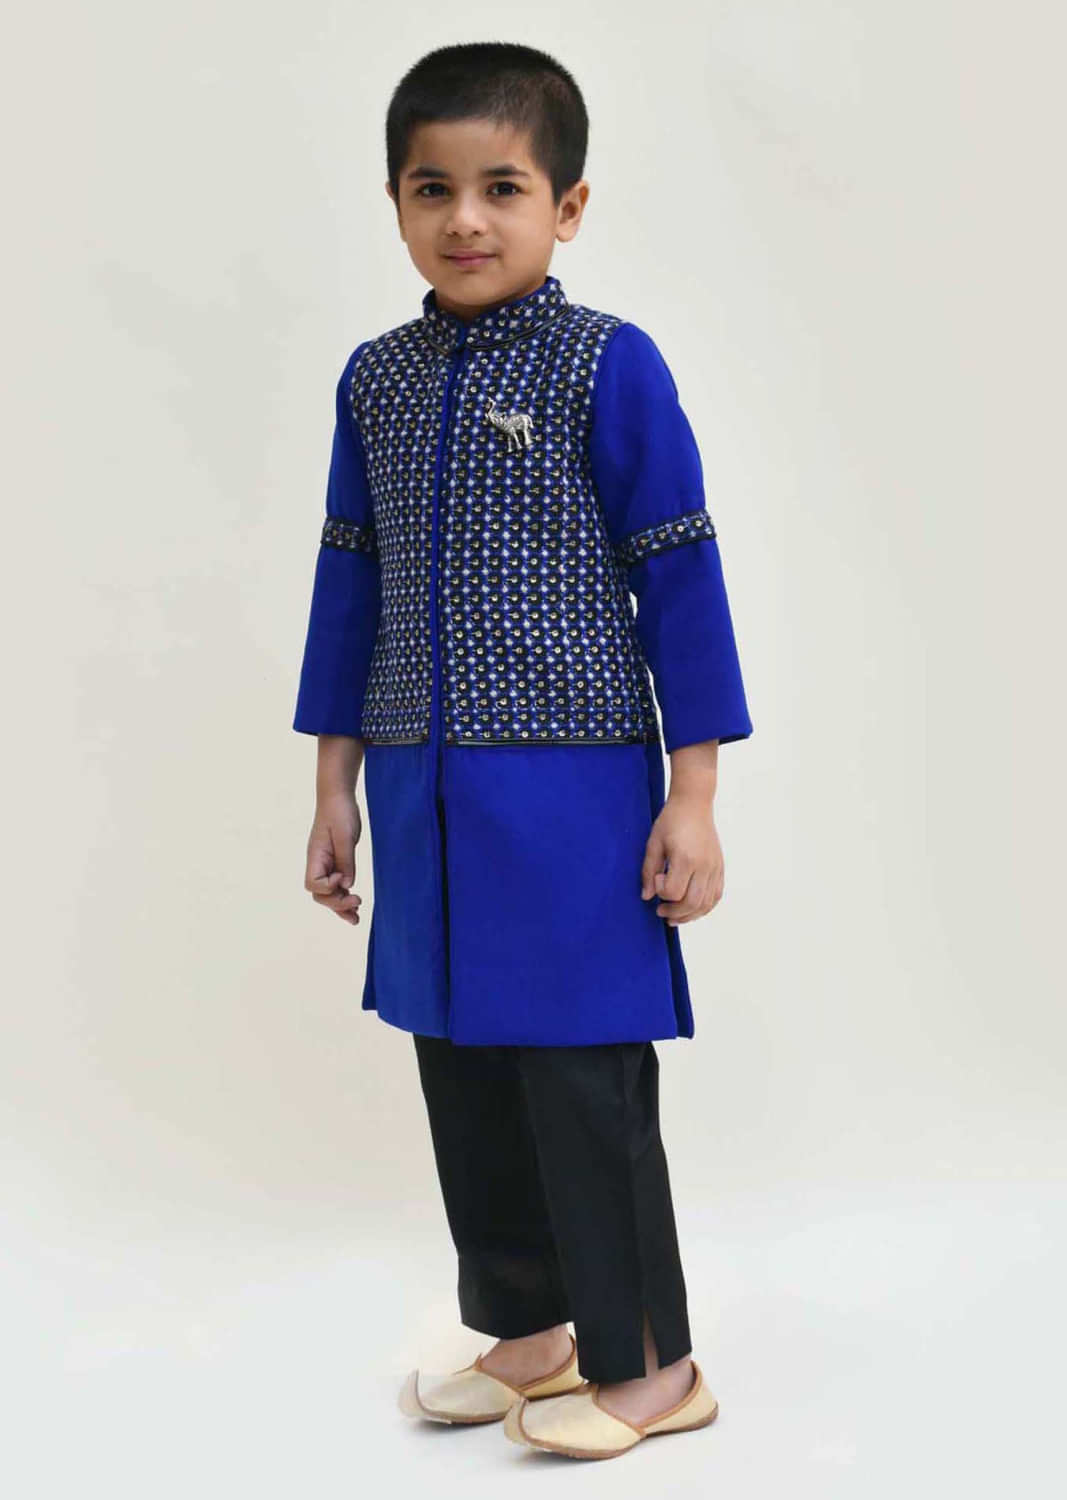 Kalki Boys Blue And Black Ajkan With Embroidery Detailing And Black Pant By Fayon Kids